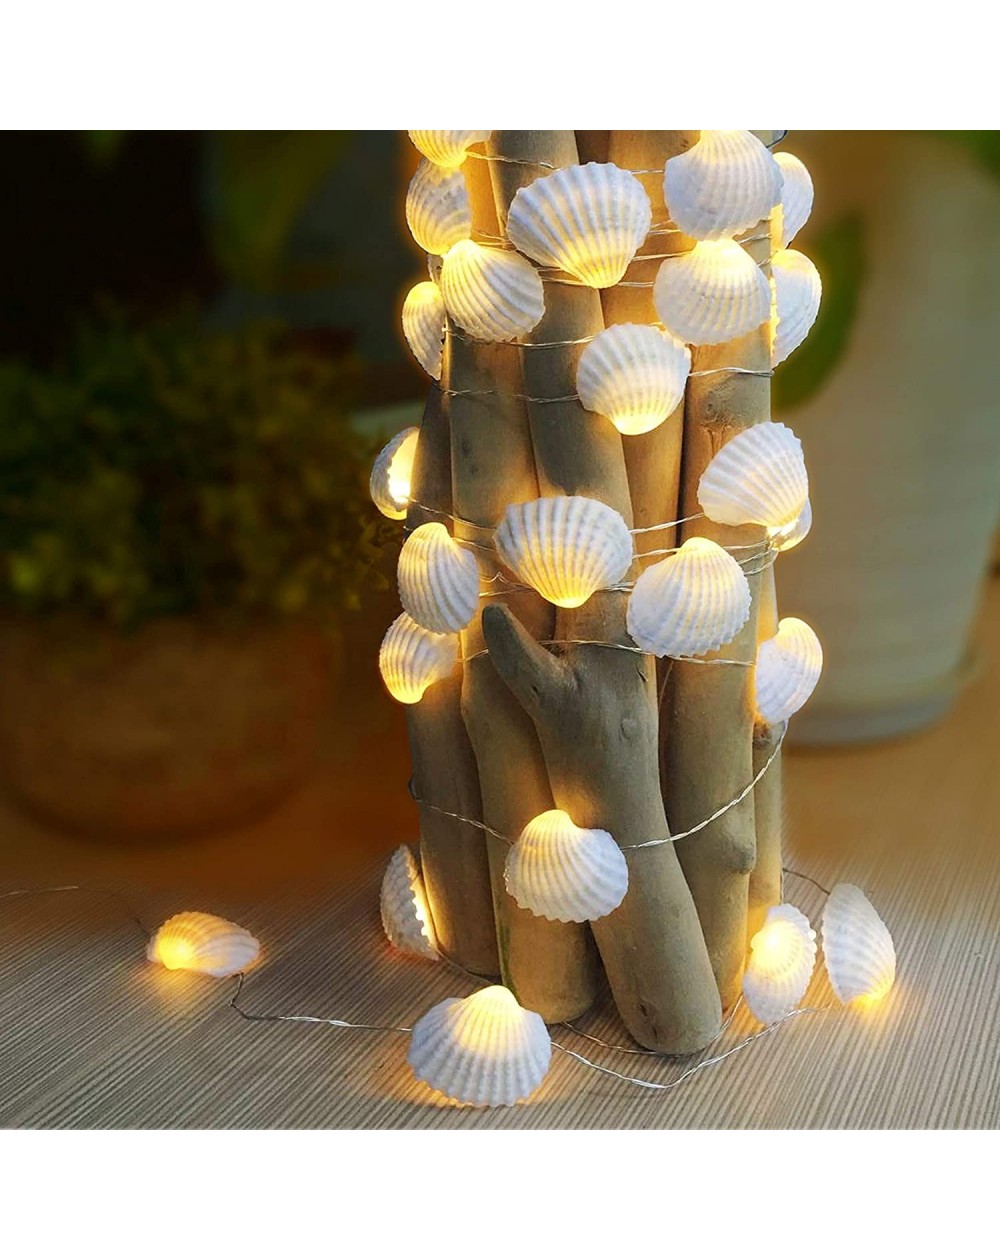 Indoor String Lights Natural Beach Seashell String Lights 13.85 Ft 40 Warm White LED Weatherproof Battery Operated 8 Modes Oc...